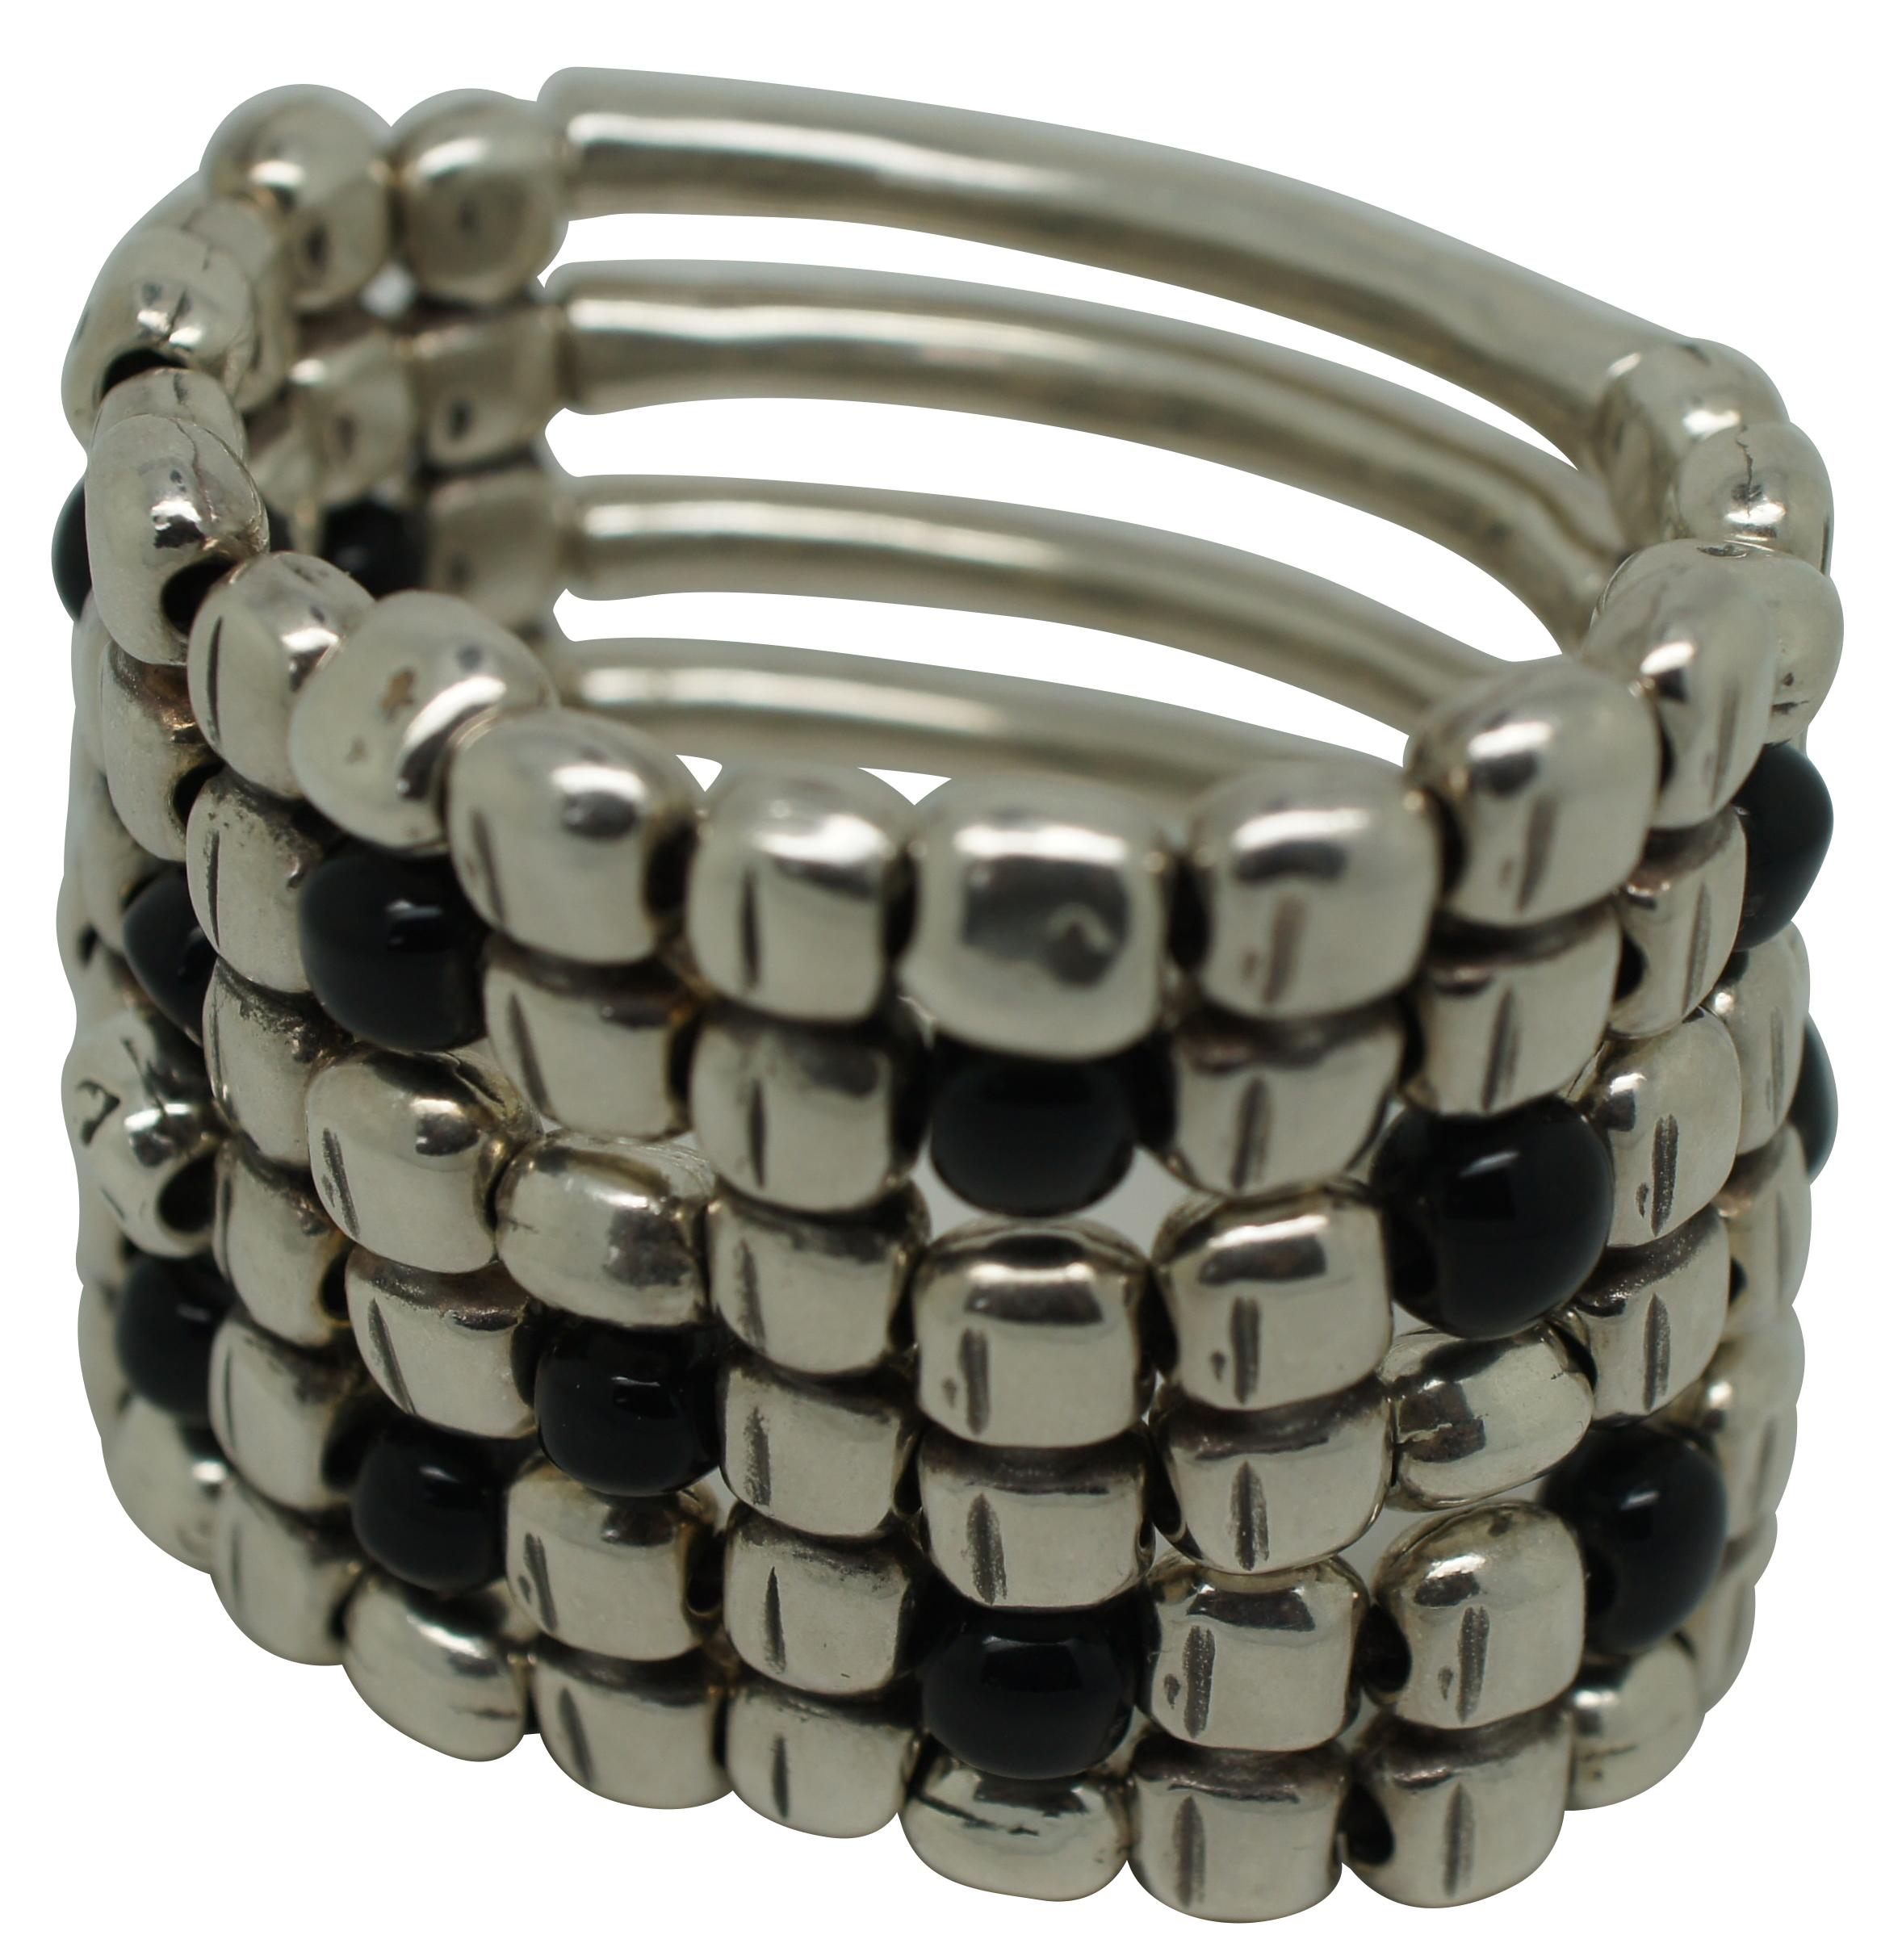 Uno de 50 silver tone and black beaded six layer wide stretchy cuff / bangle bracelet with stone shaped beads at the front and bone / coral shaped beads at the back.